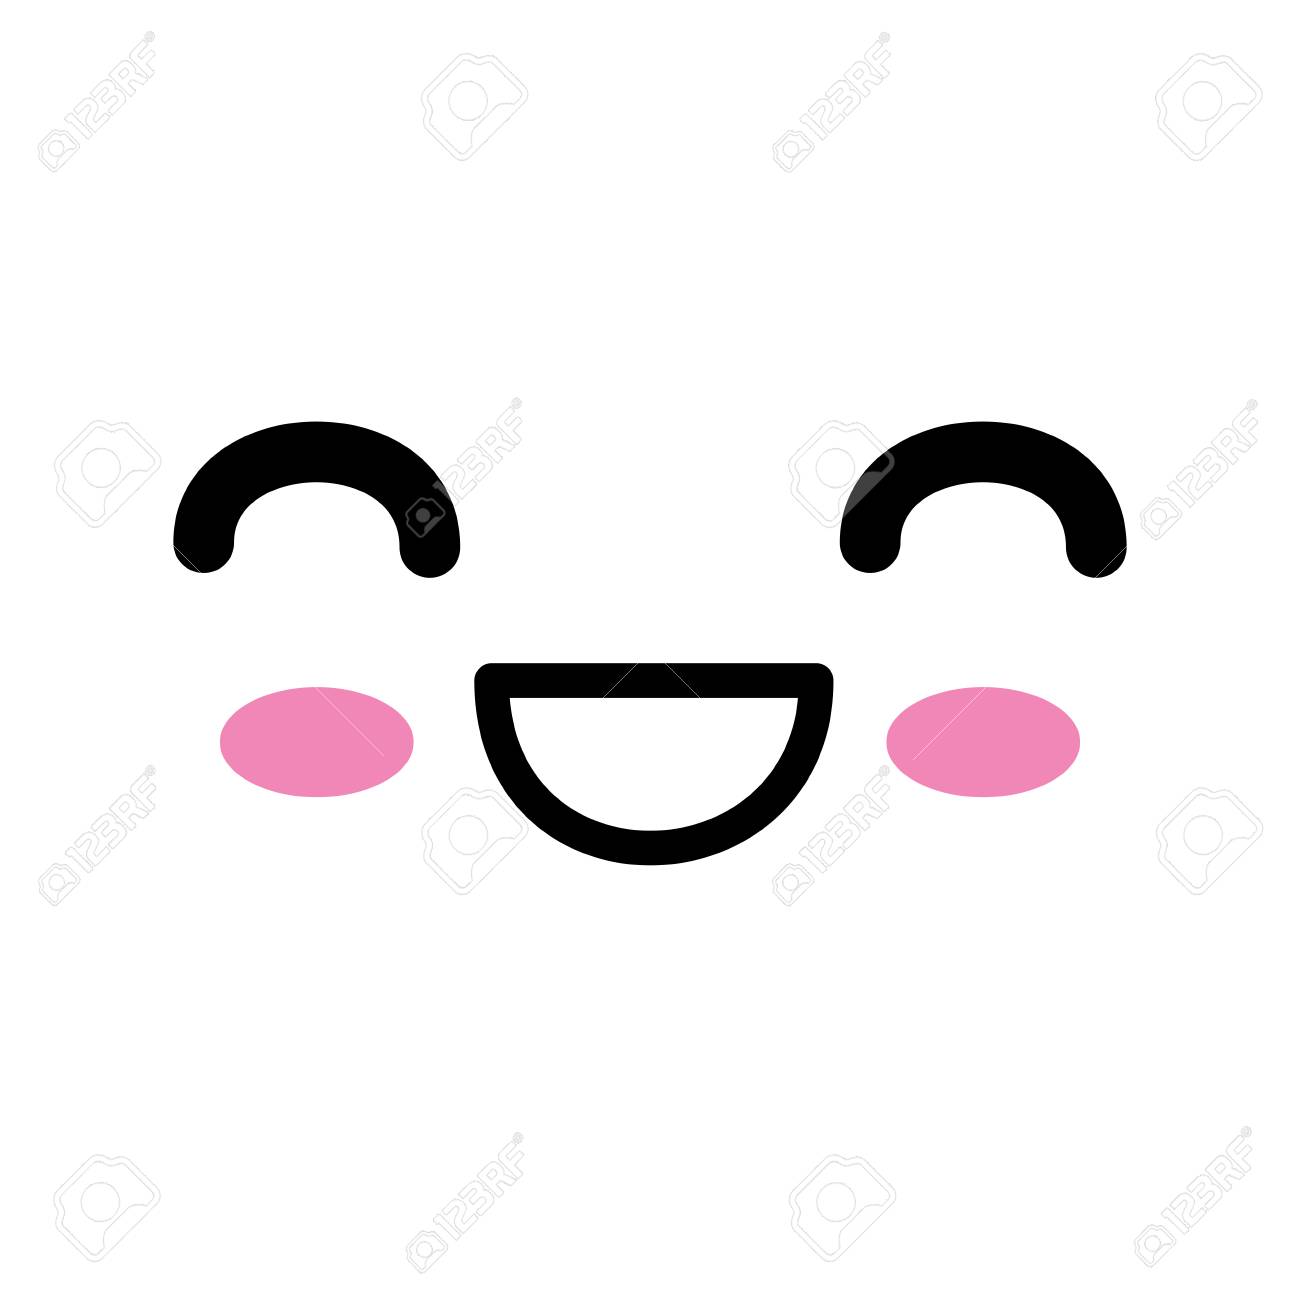 79351329-kawaii-happy-face-icon-over-white-background-vector-illustration.jpg